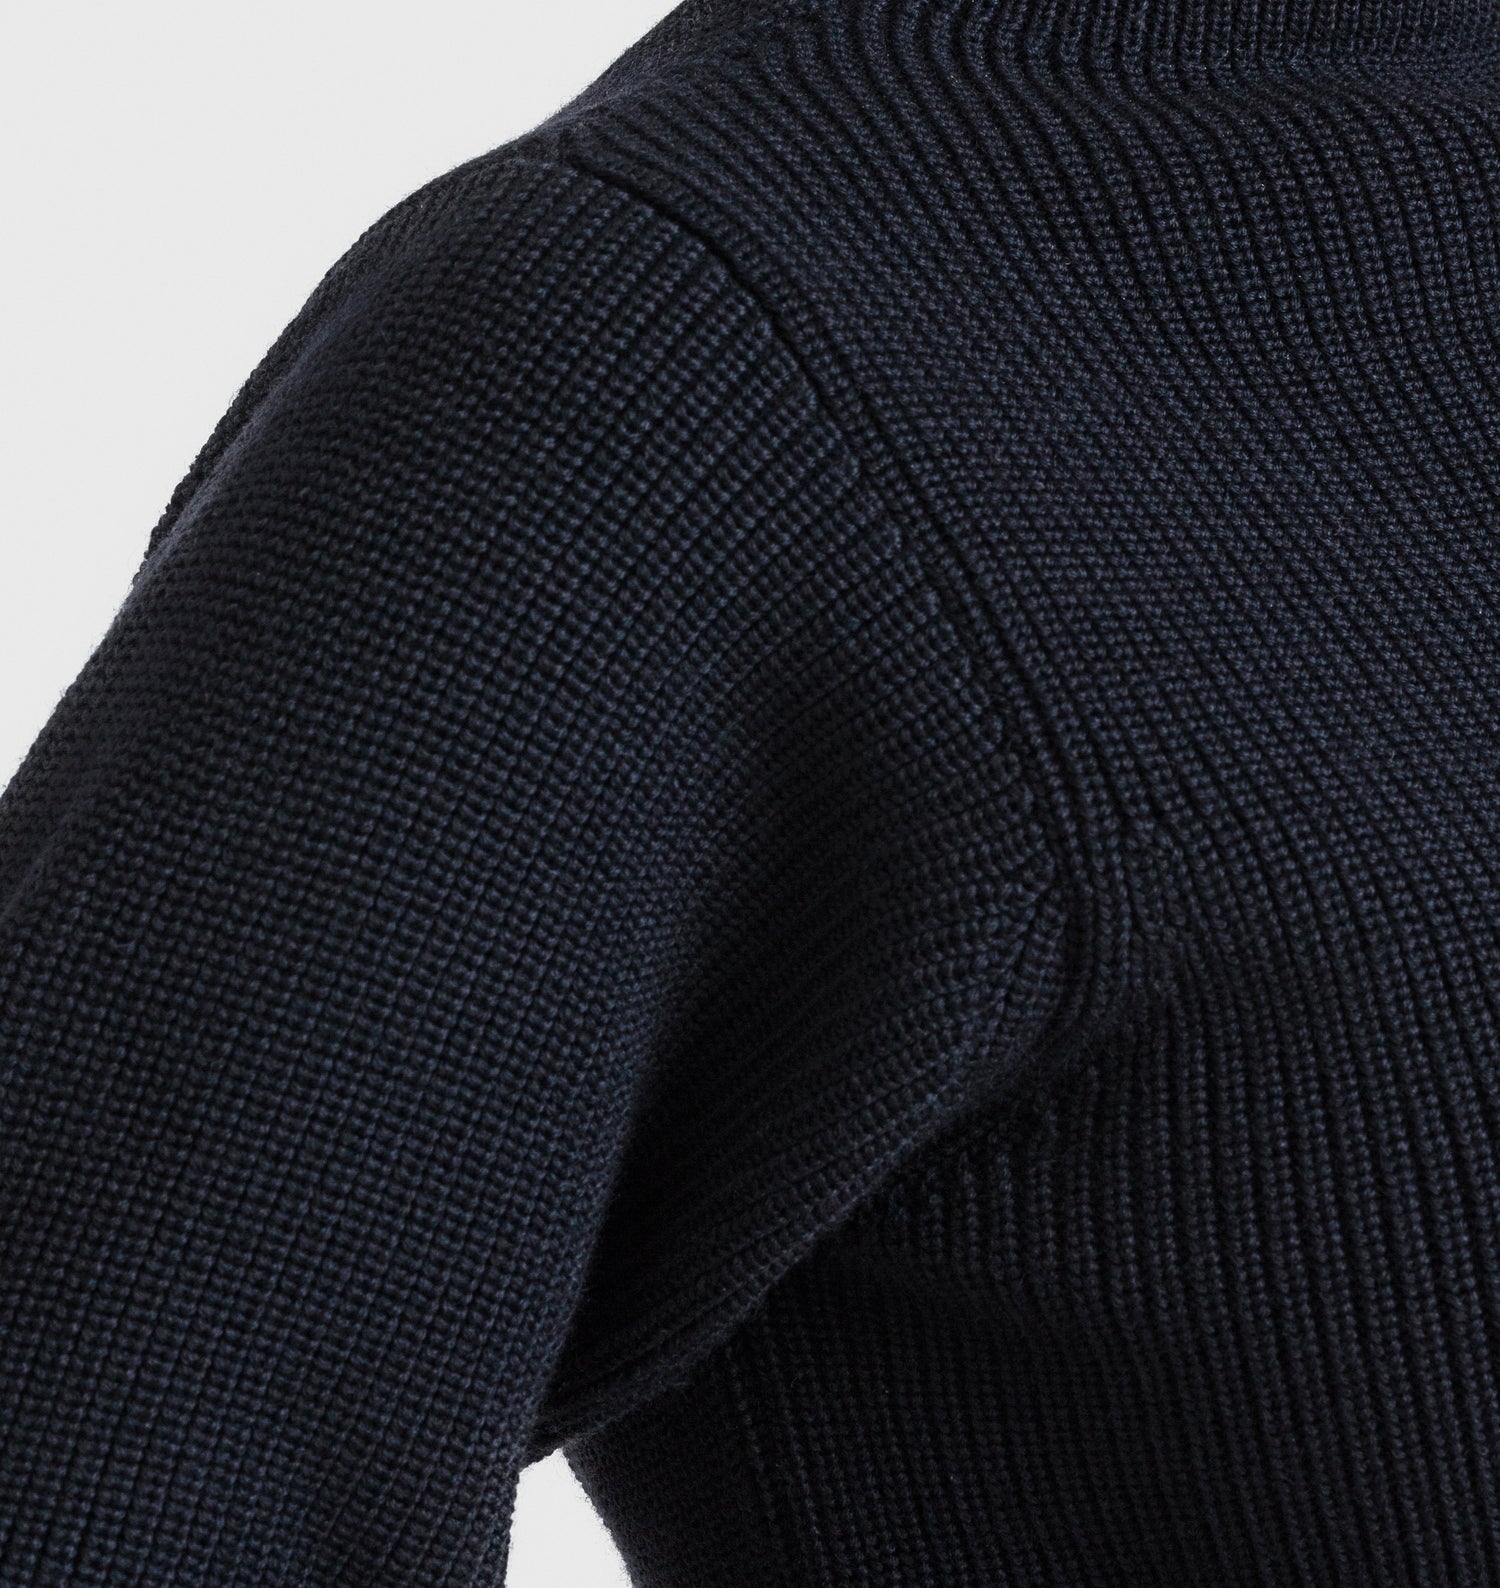 Linking detail on Sailor Crewneck in Navy Blue